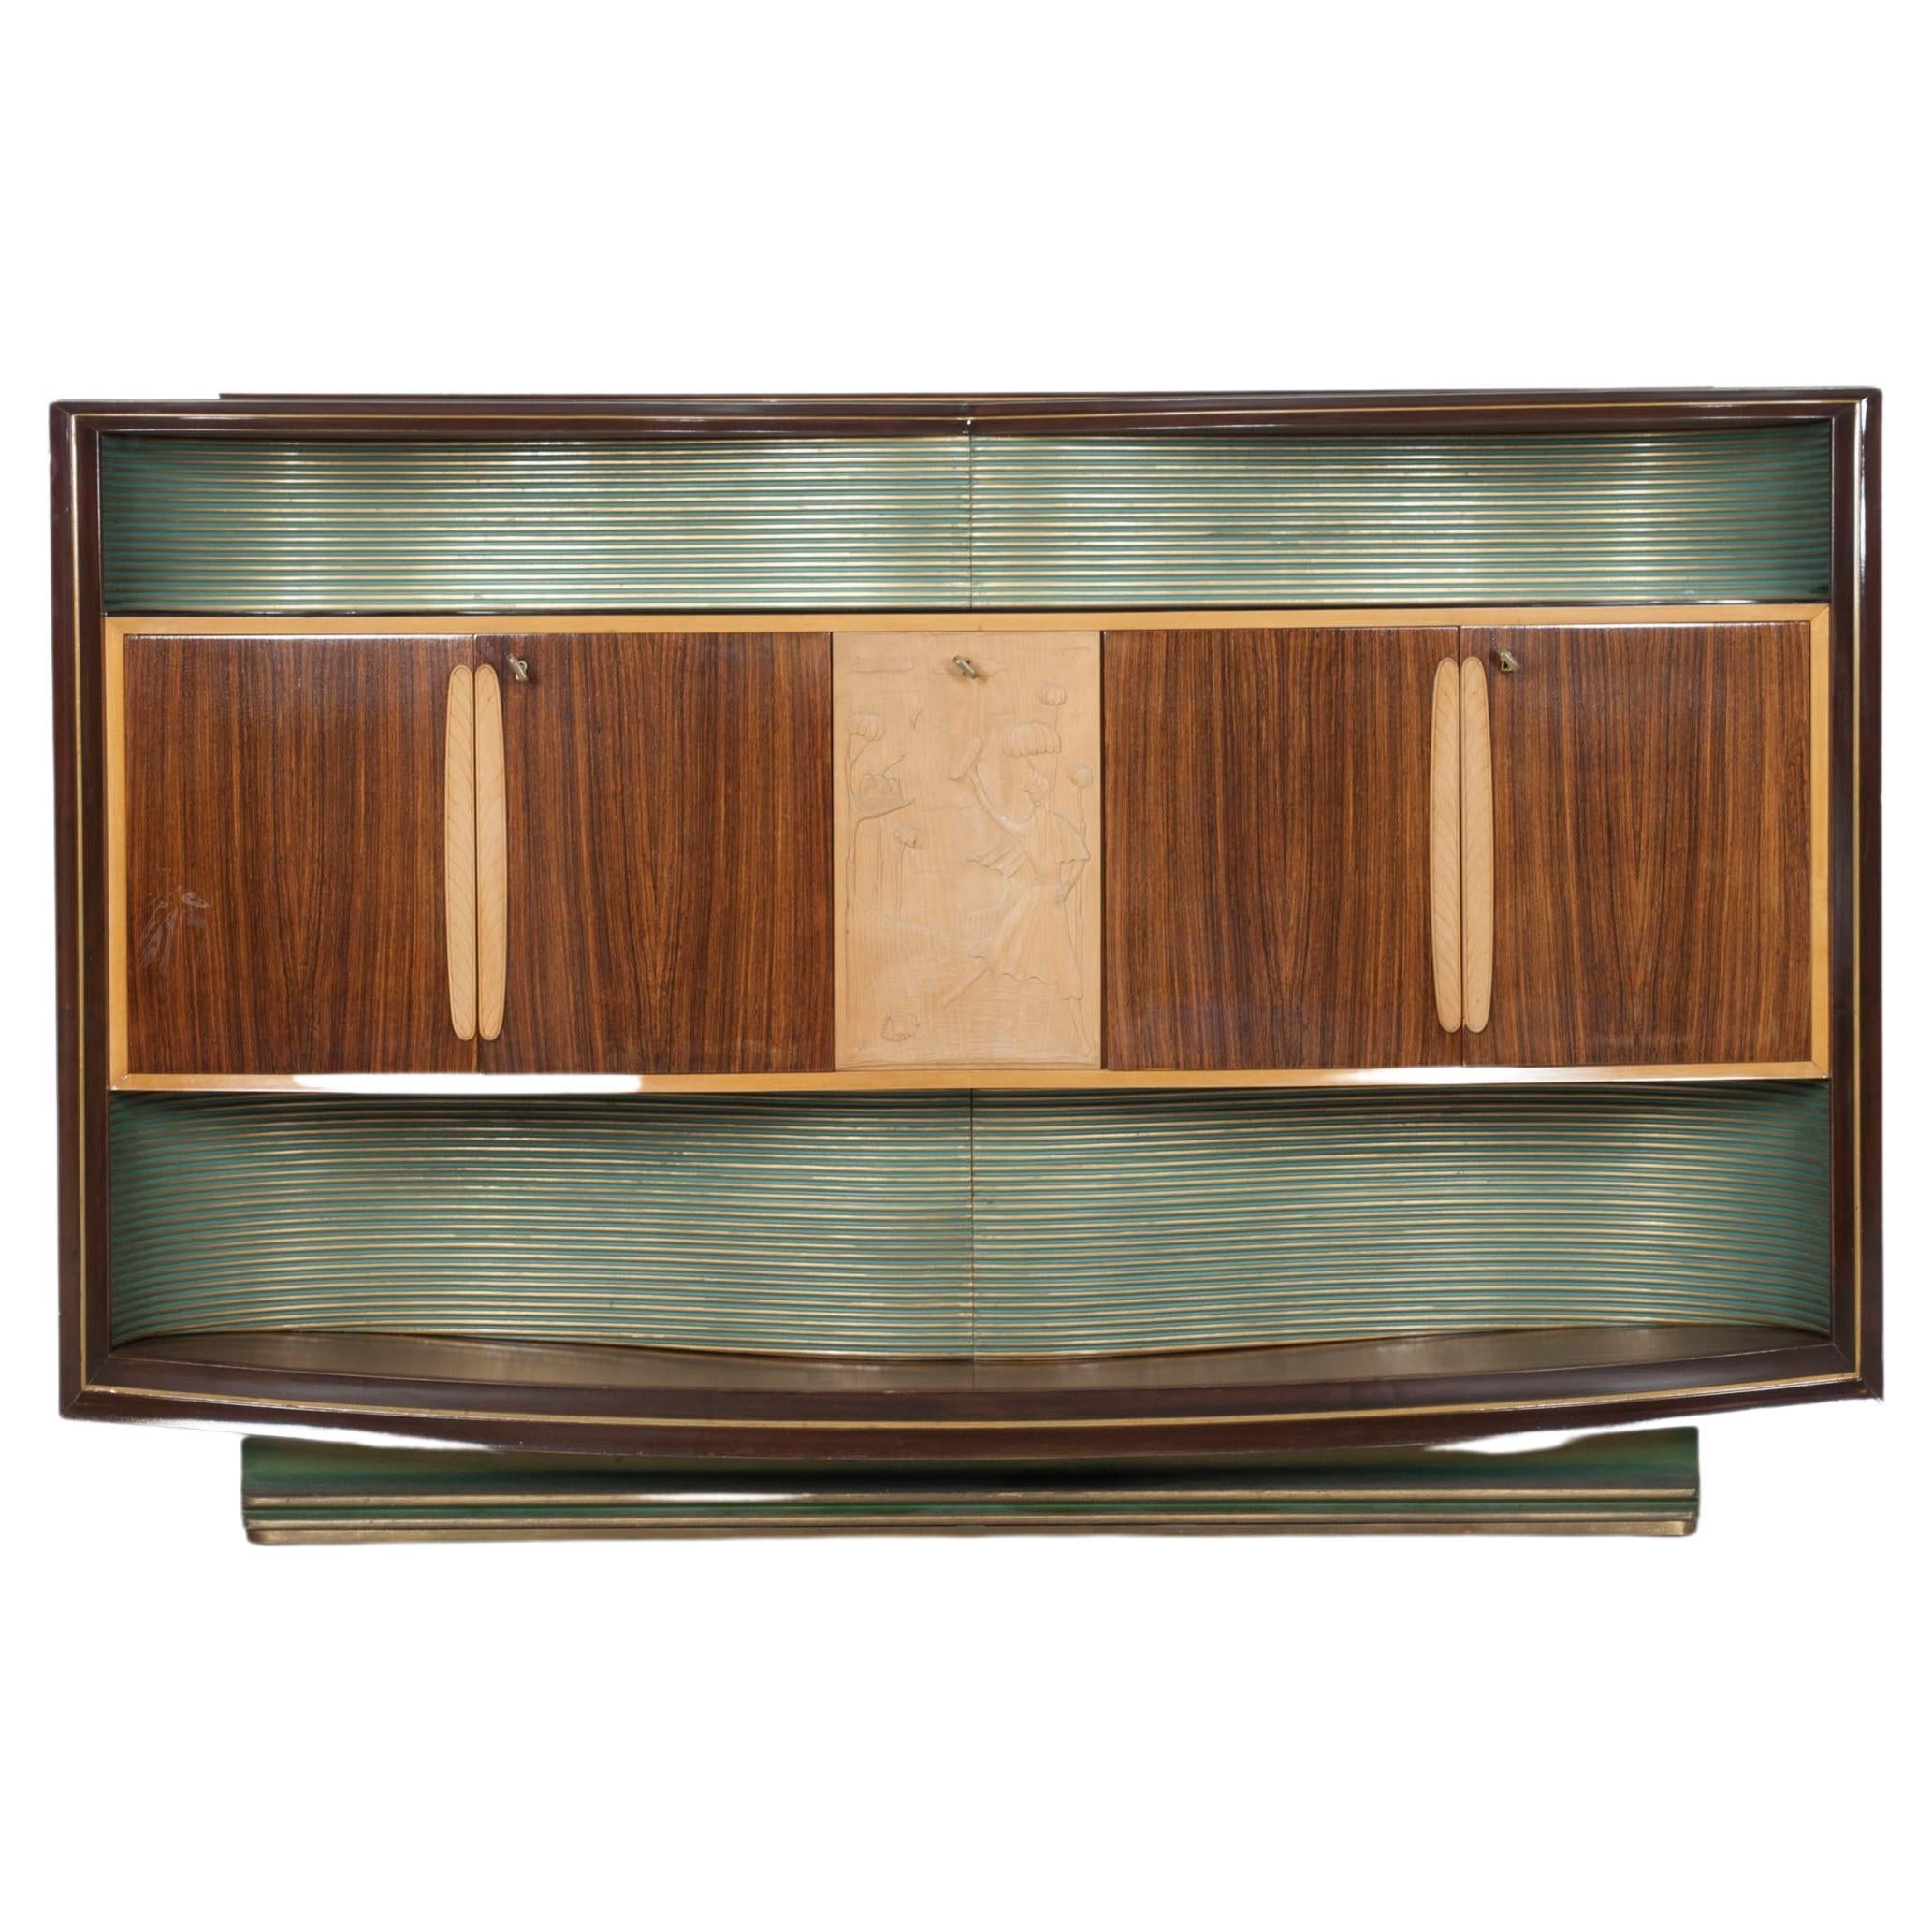 Lighted Vittorio Dassi "Midcentury" bar cabinet from the 1950s For Sale